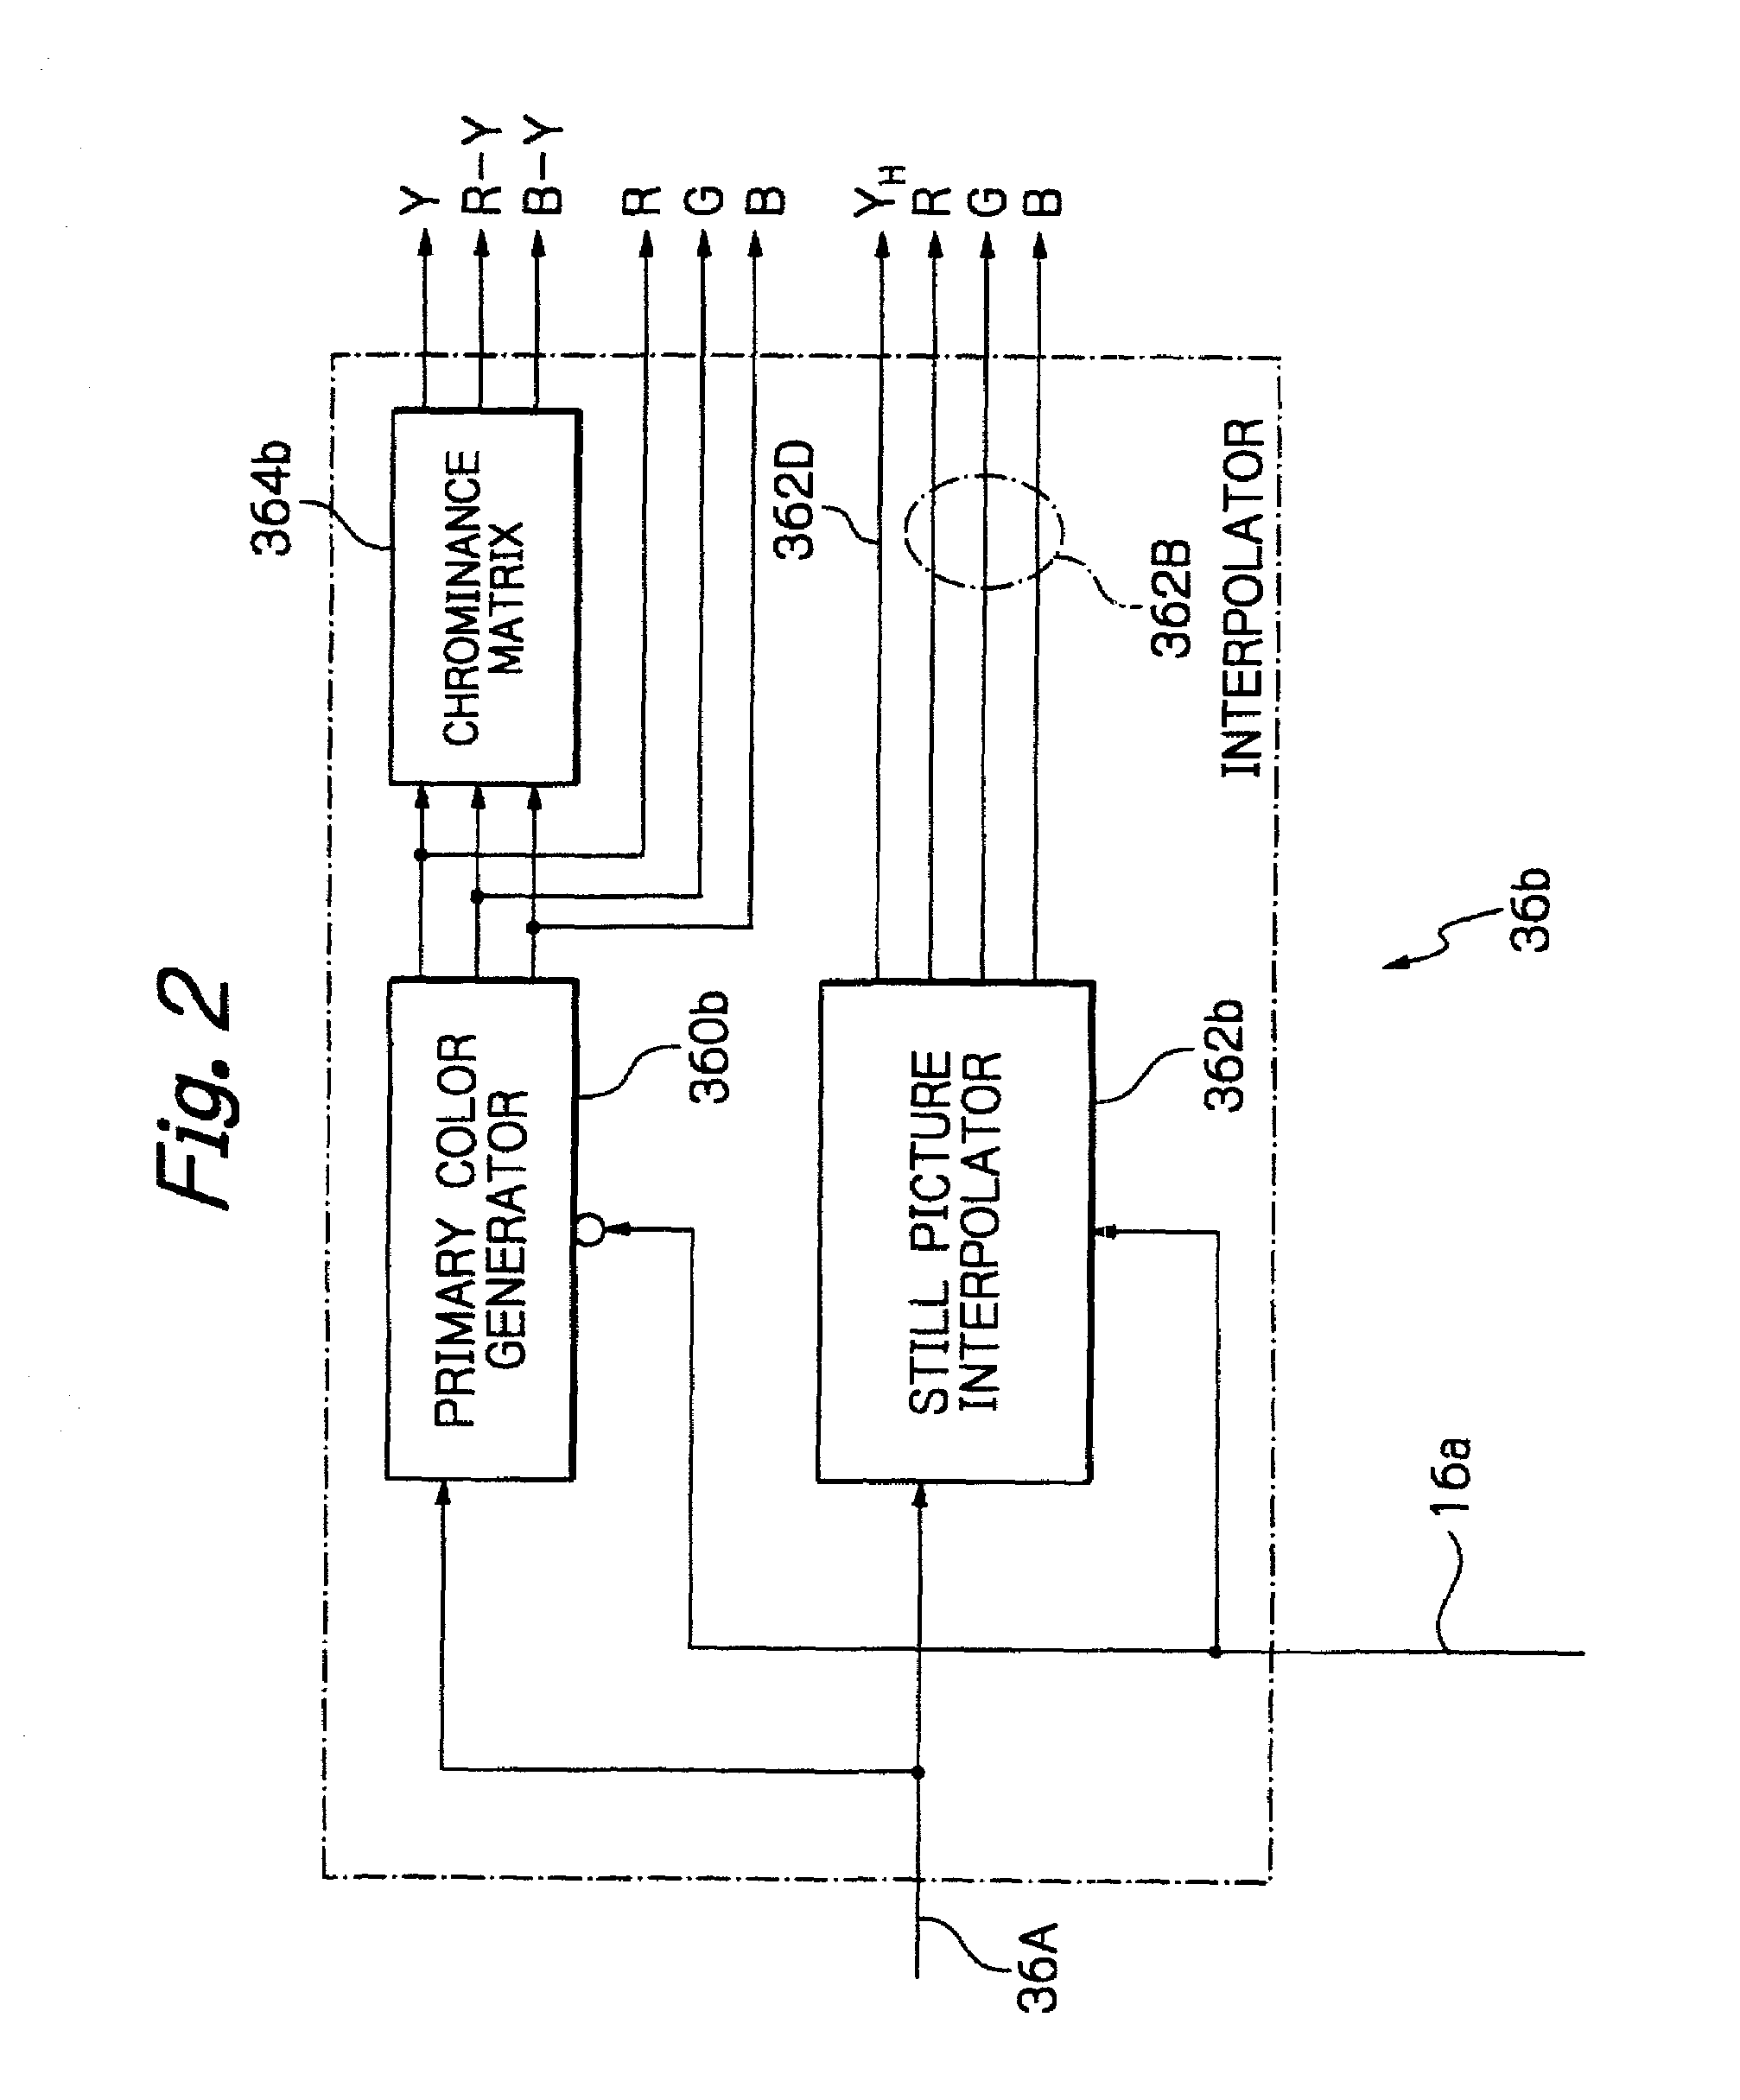 Solid-state honeycomb type image pickup apparatus using a complementary color filter and signal processing method therefor